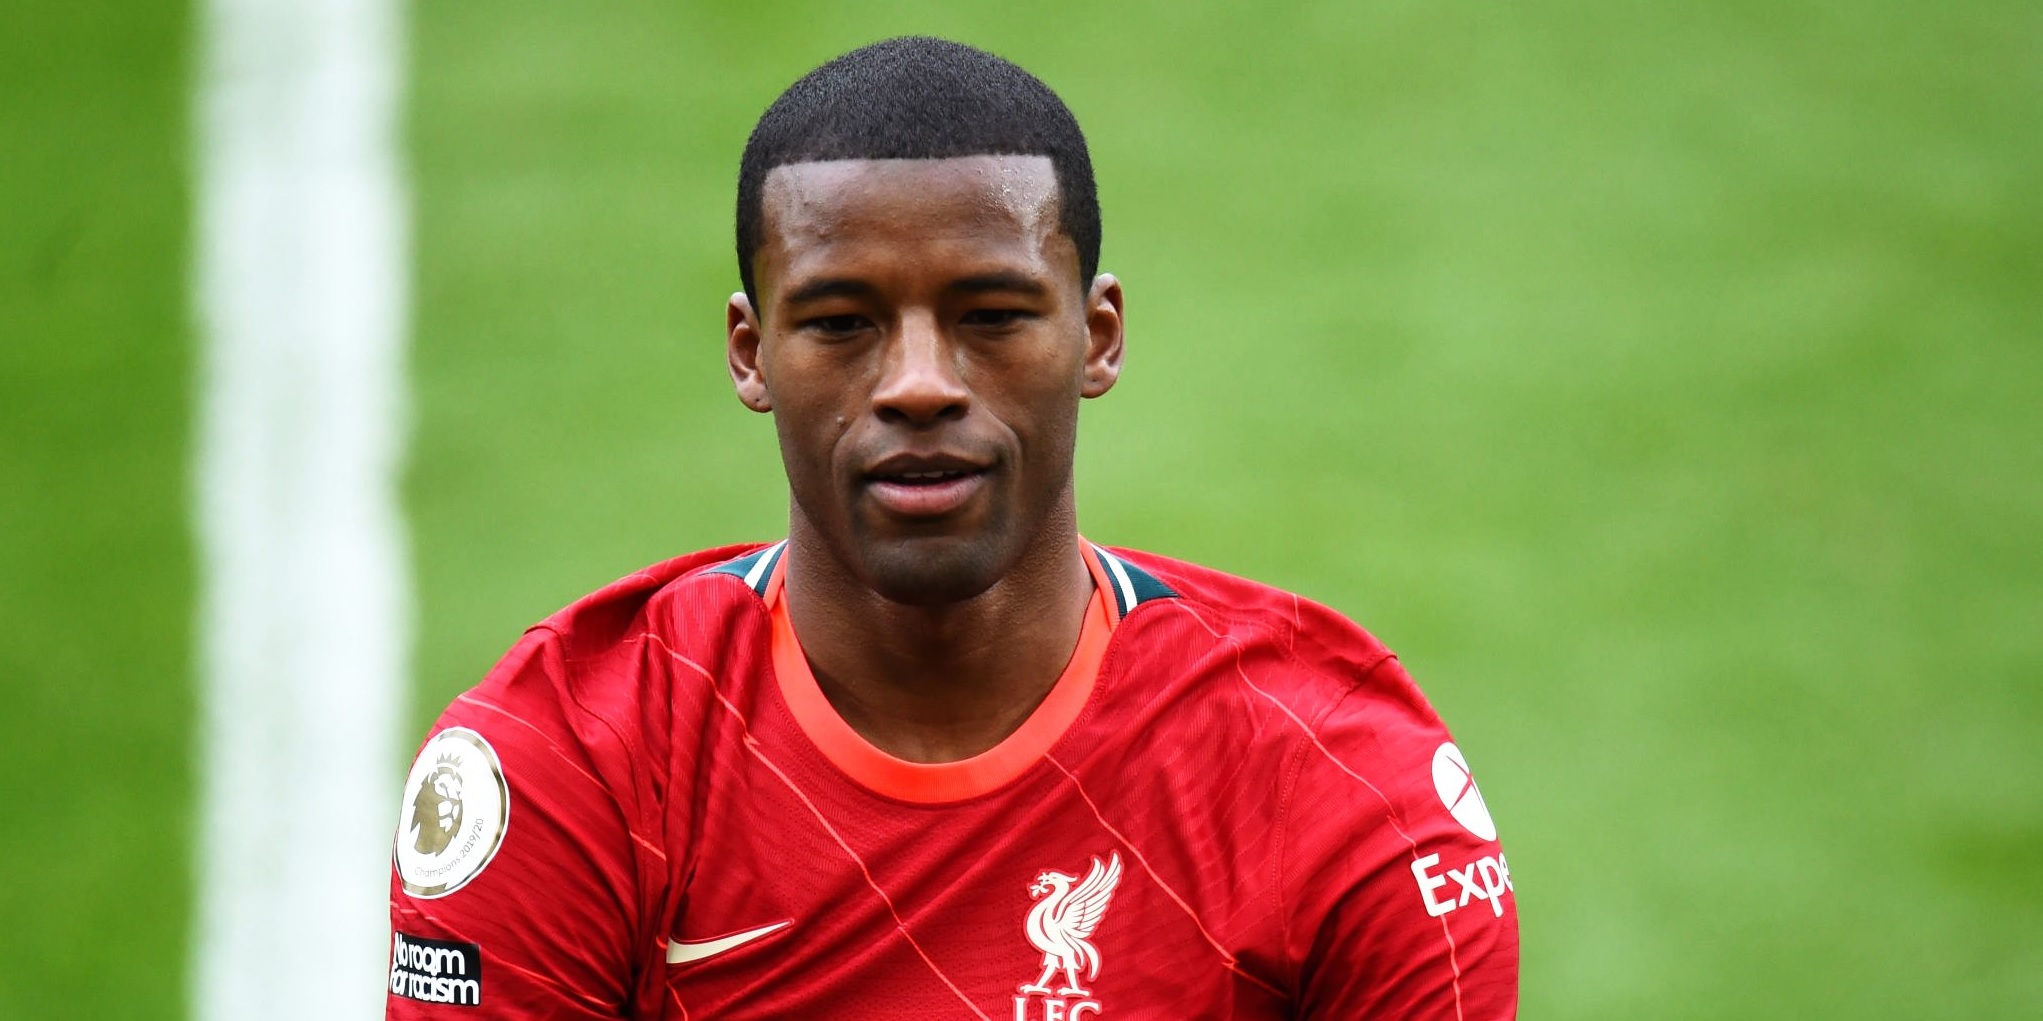 Gini Wijnaldum told team-mates why he refused new Liverpool contract ahead of Barcelona move